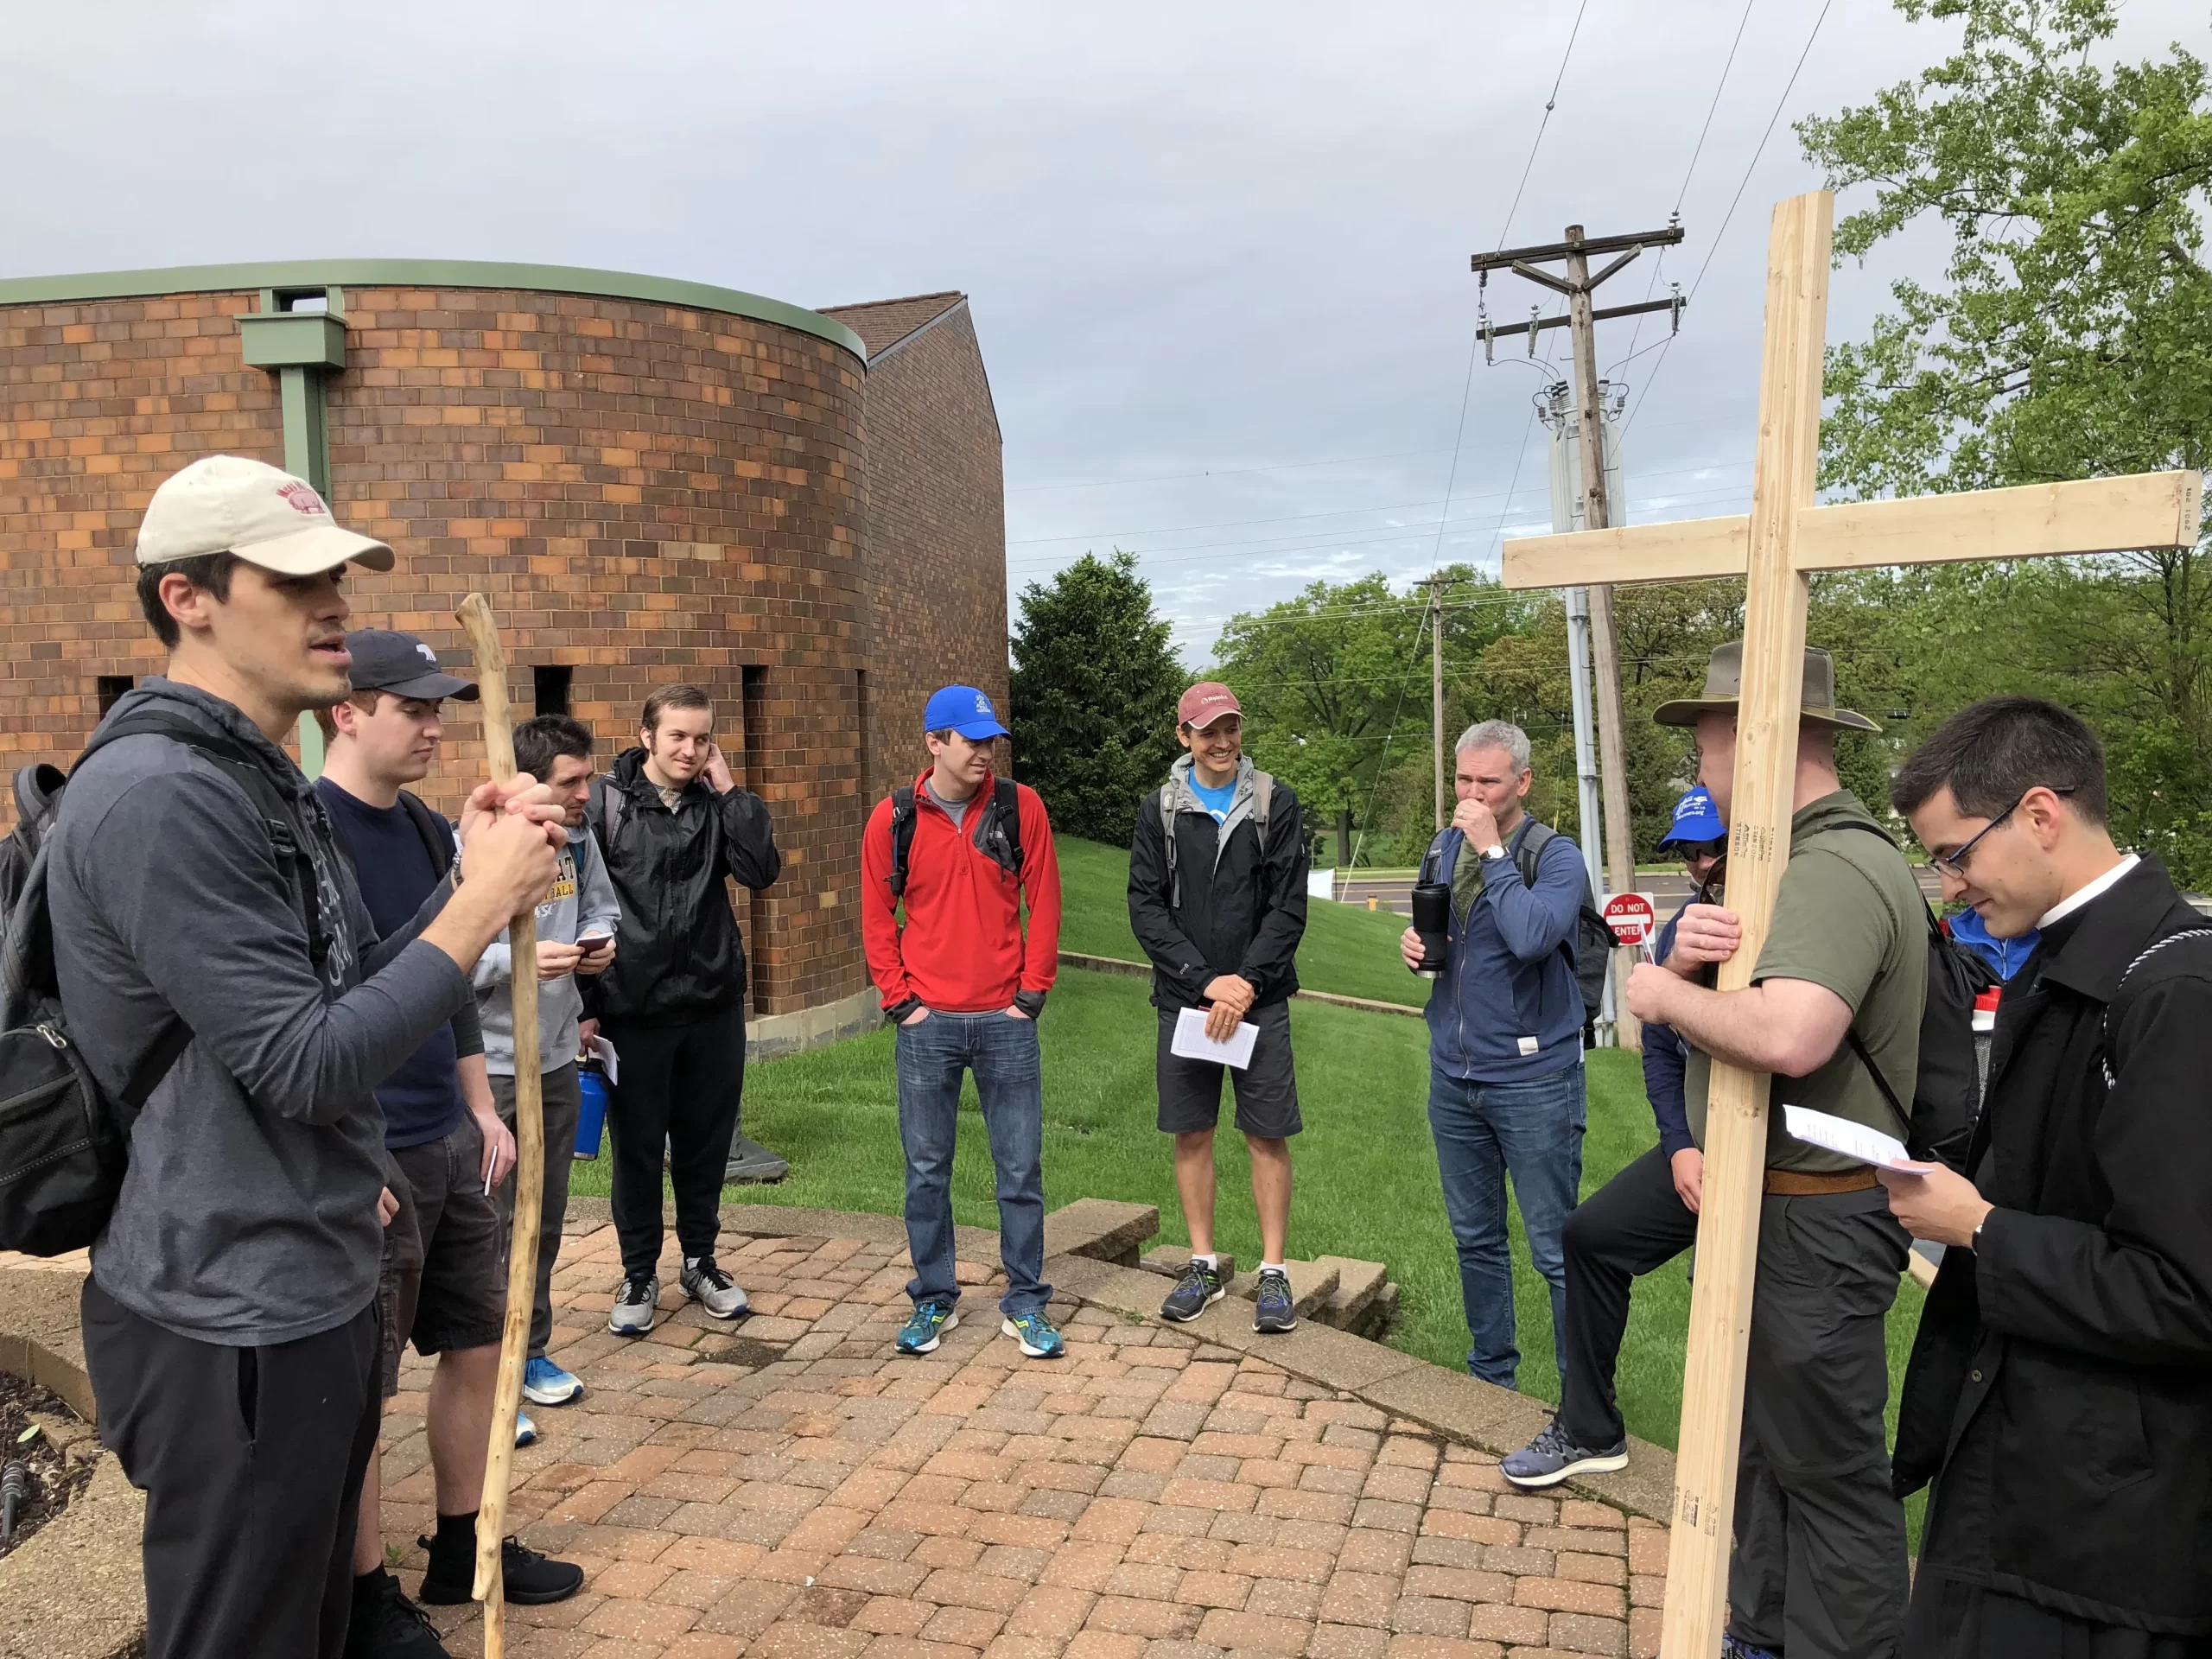 Founder Gabe Jones, left, speaks to participants at the commencement of the Joseph Challenge Pilgrimage in May 2019. Credit: Jonah McKeown/CNA